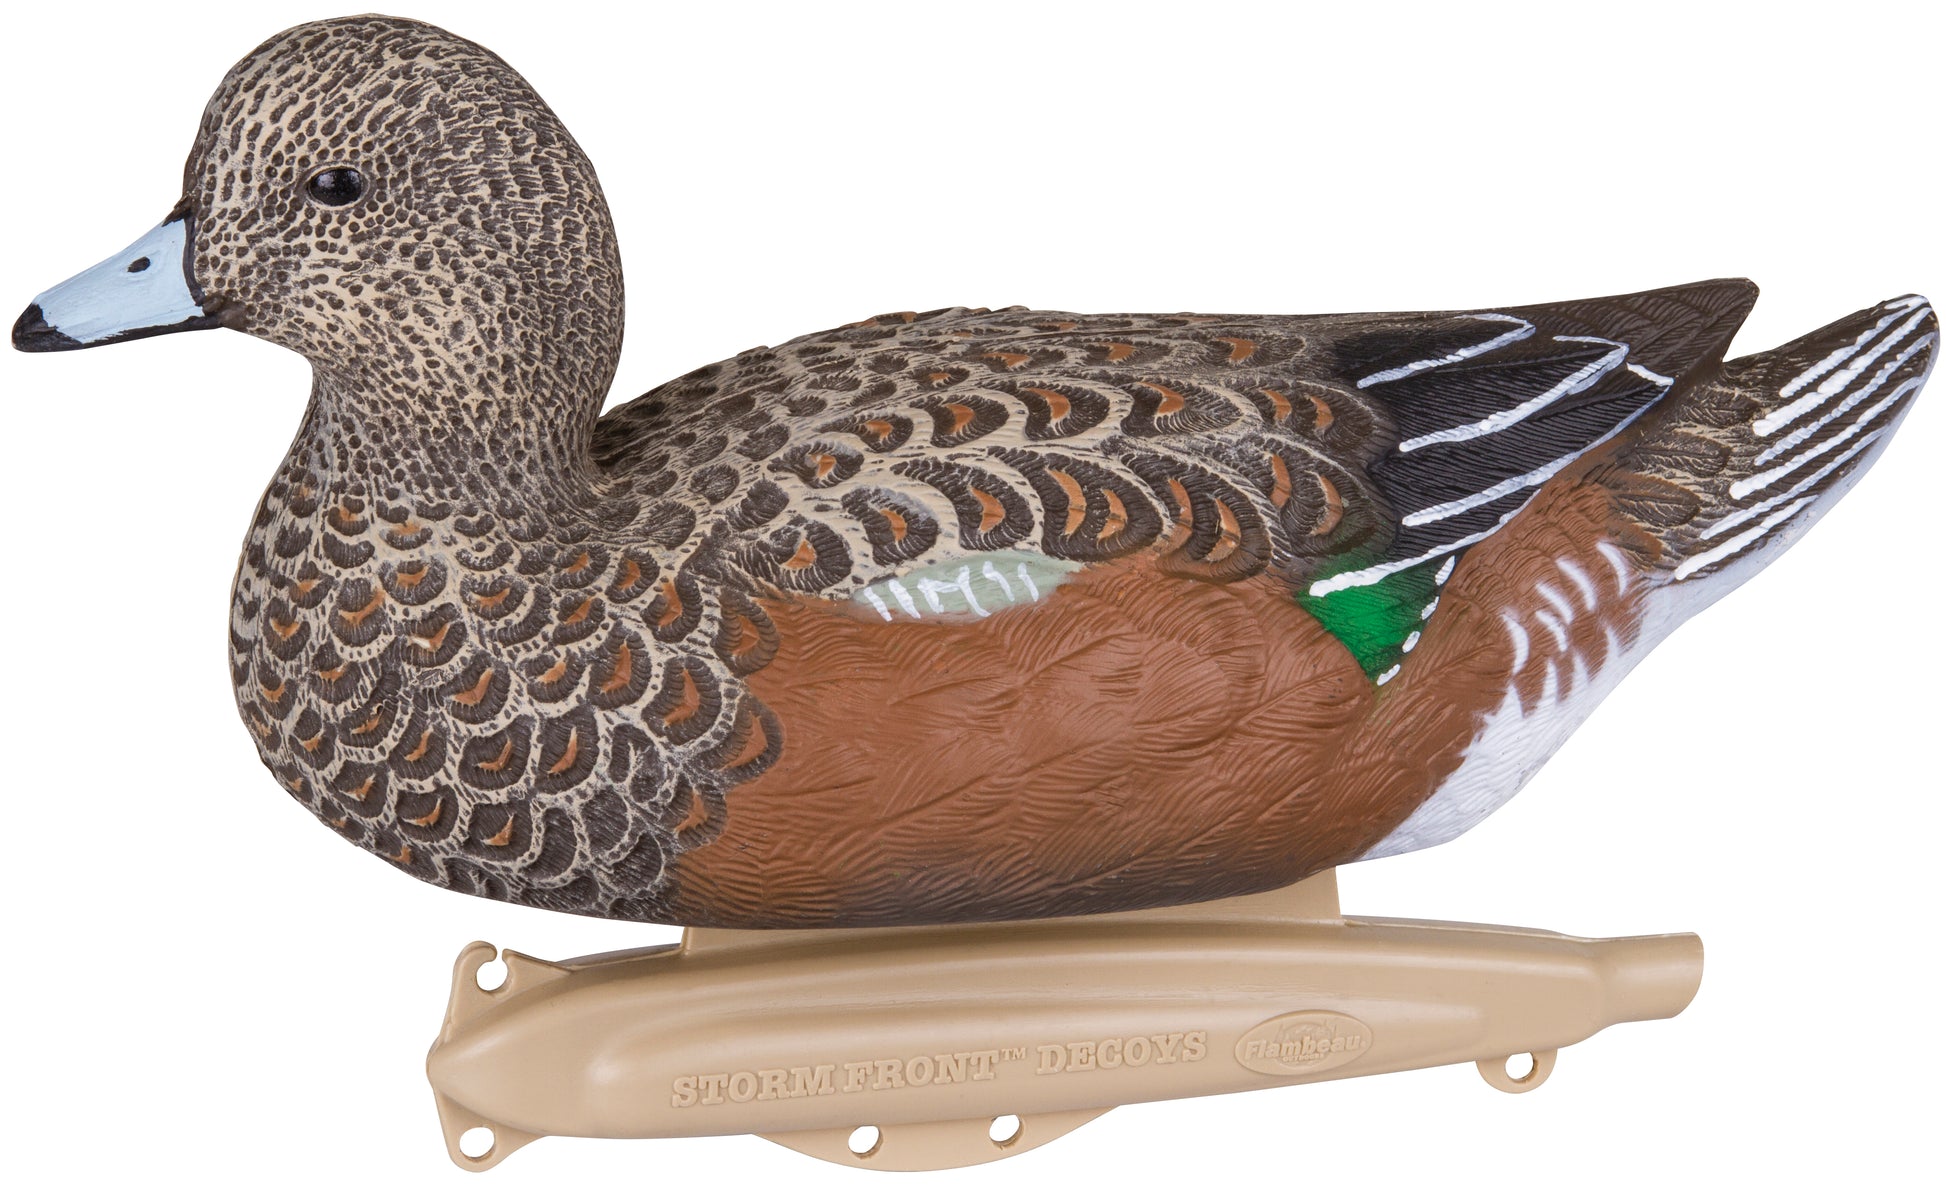 UVision ultraviolet (UV) reflective duck and goose decoy paint is designed  for bird vision.